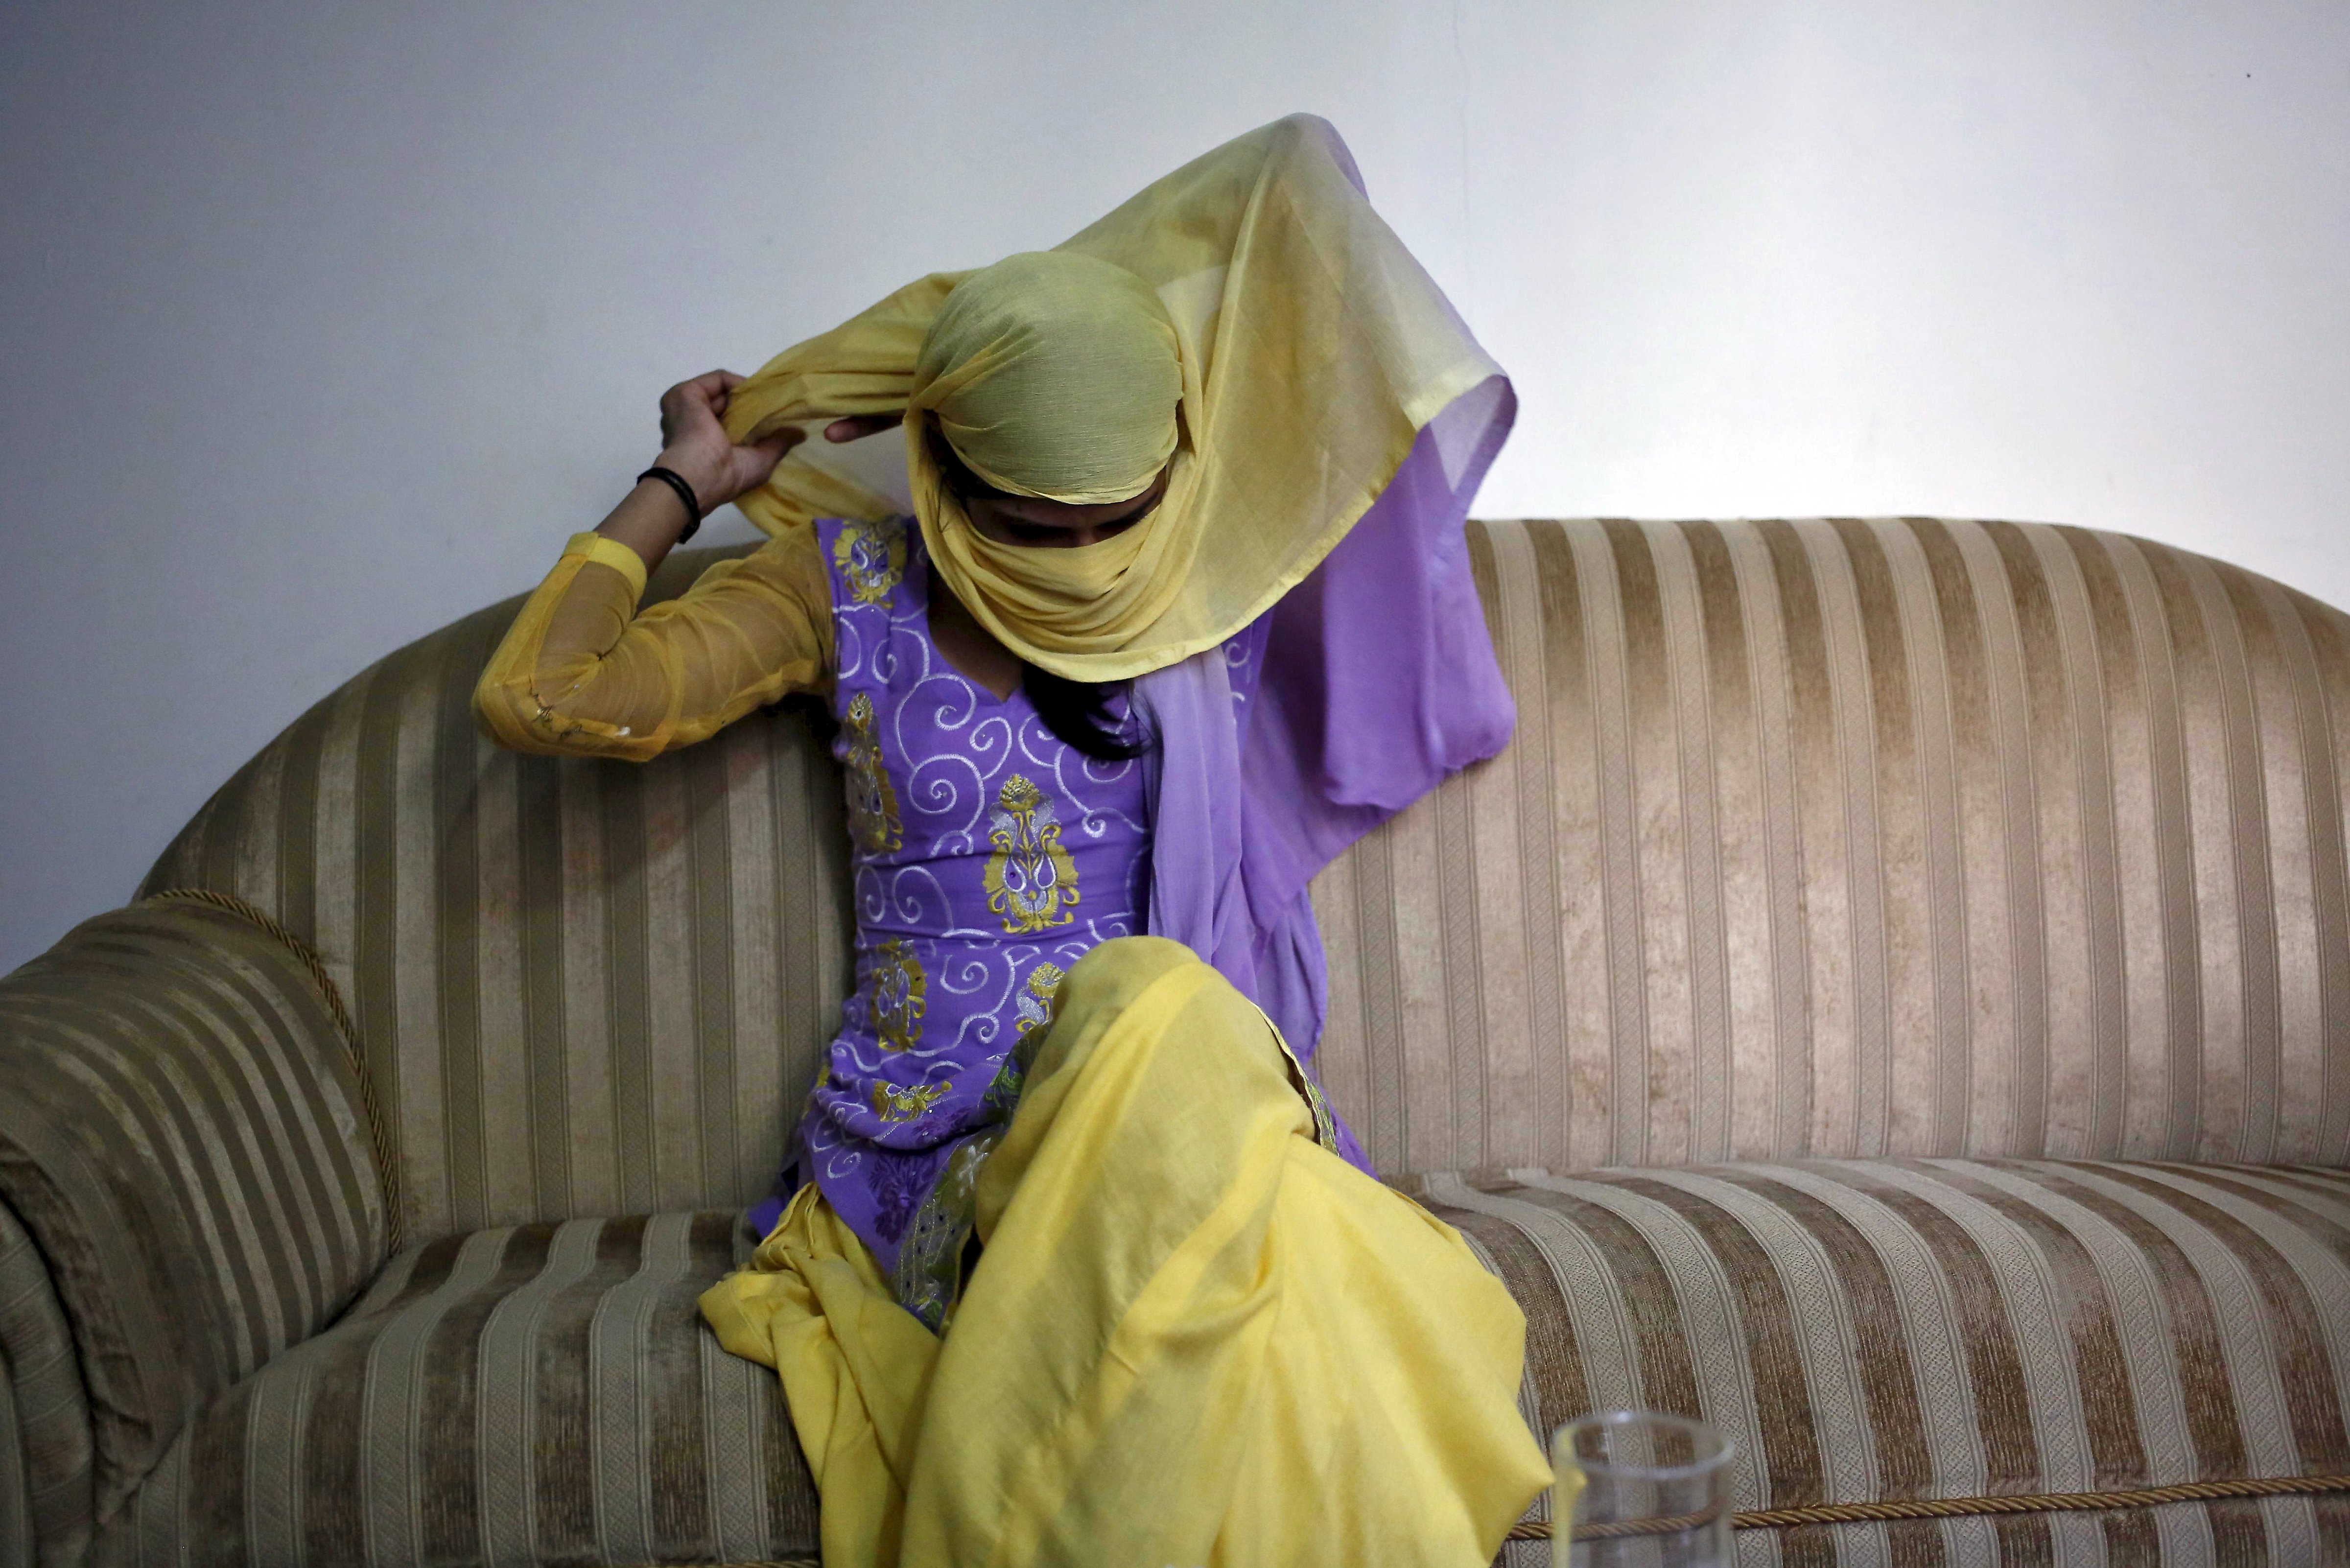 Meenakshi Kumari, 23, one of the two sisters allegedly threatened with rape by a village council in the northern Indian state of Uttar Pradesh, adjusts her headgear as she sits inside her lawyer's chamber in New Delhi on Sept. 1, 2015 (Anindito Mukherjee—Reuters)